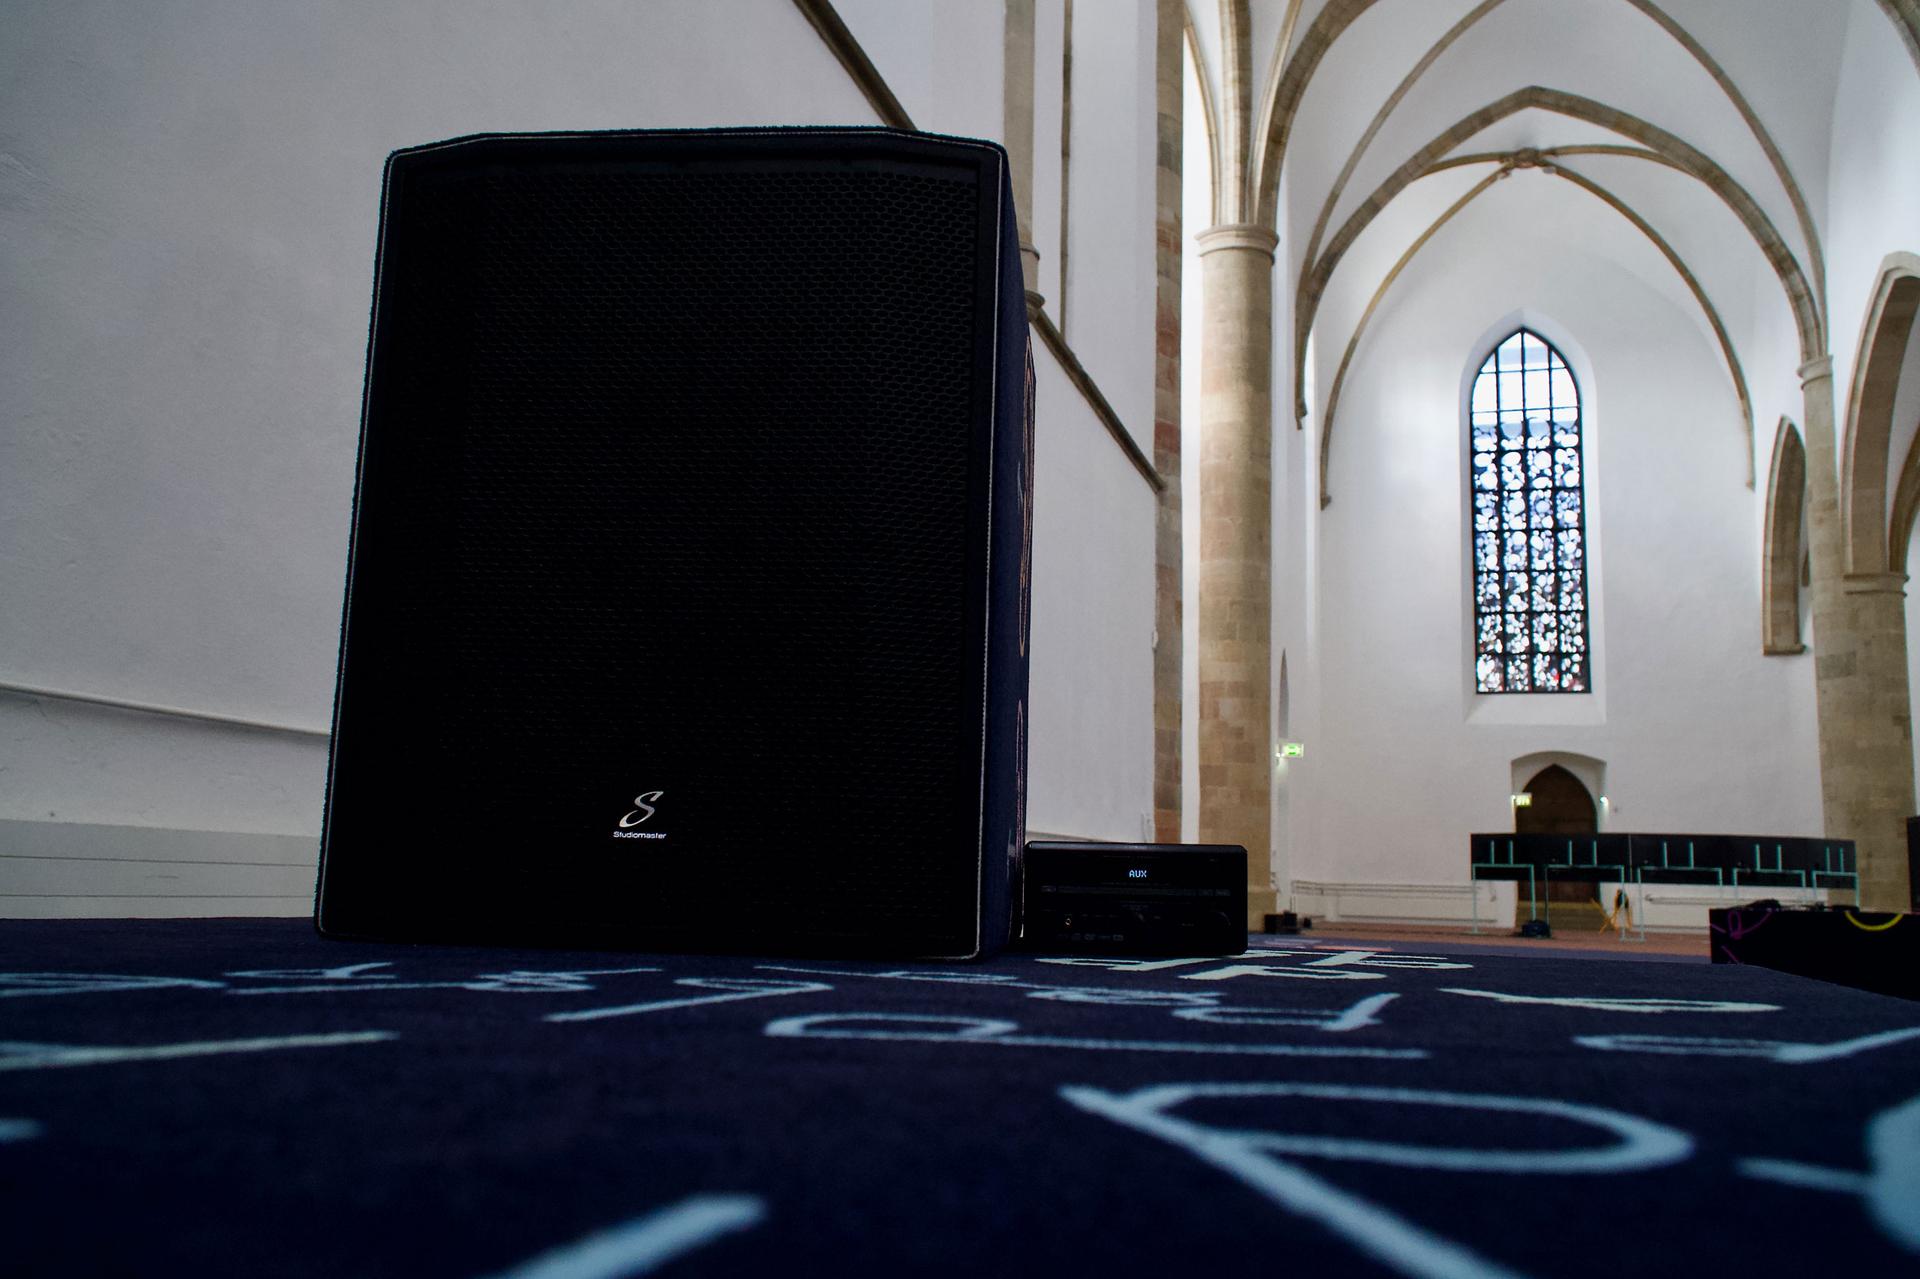 An up-close image of a speaker within a church with high ceilings.